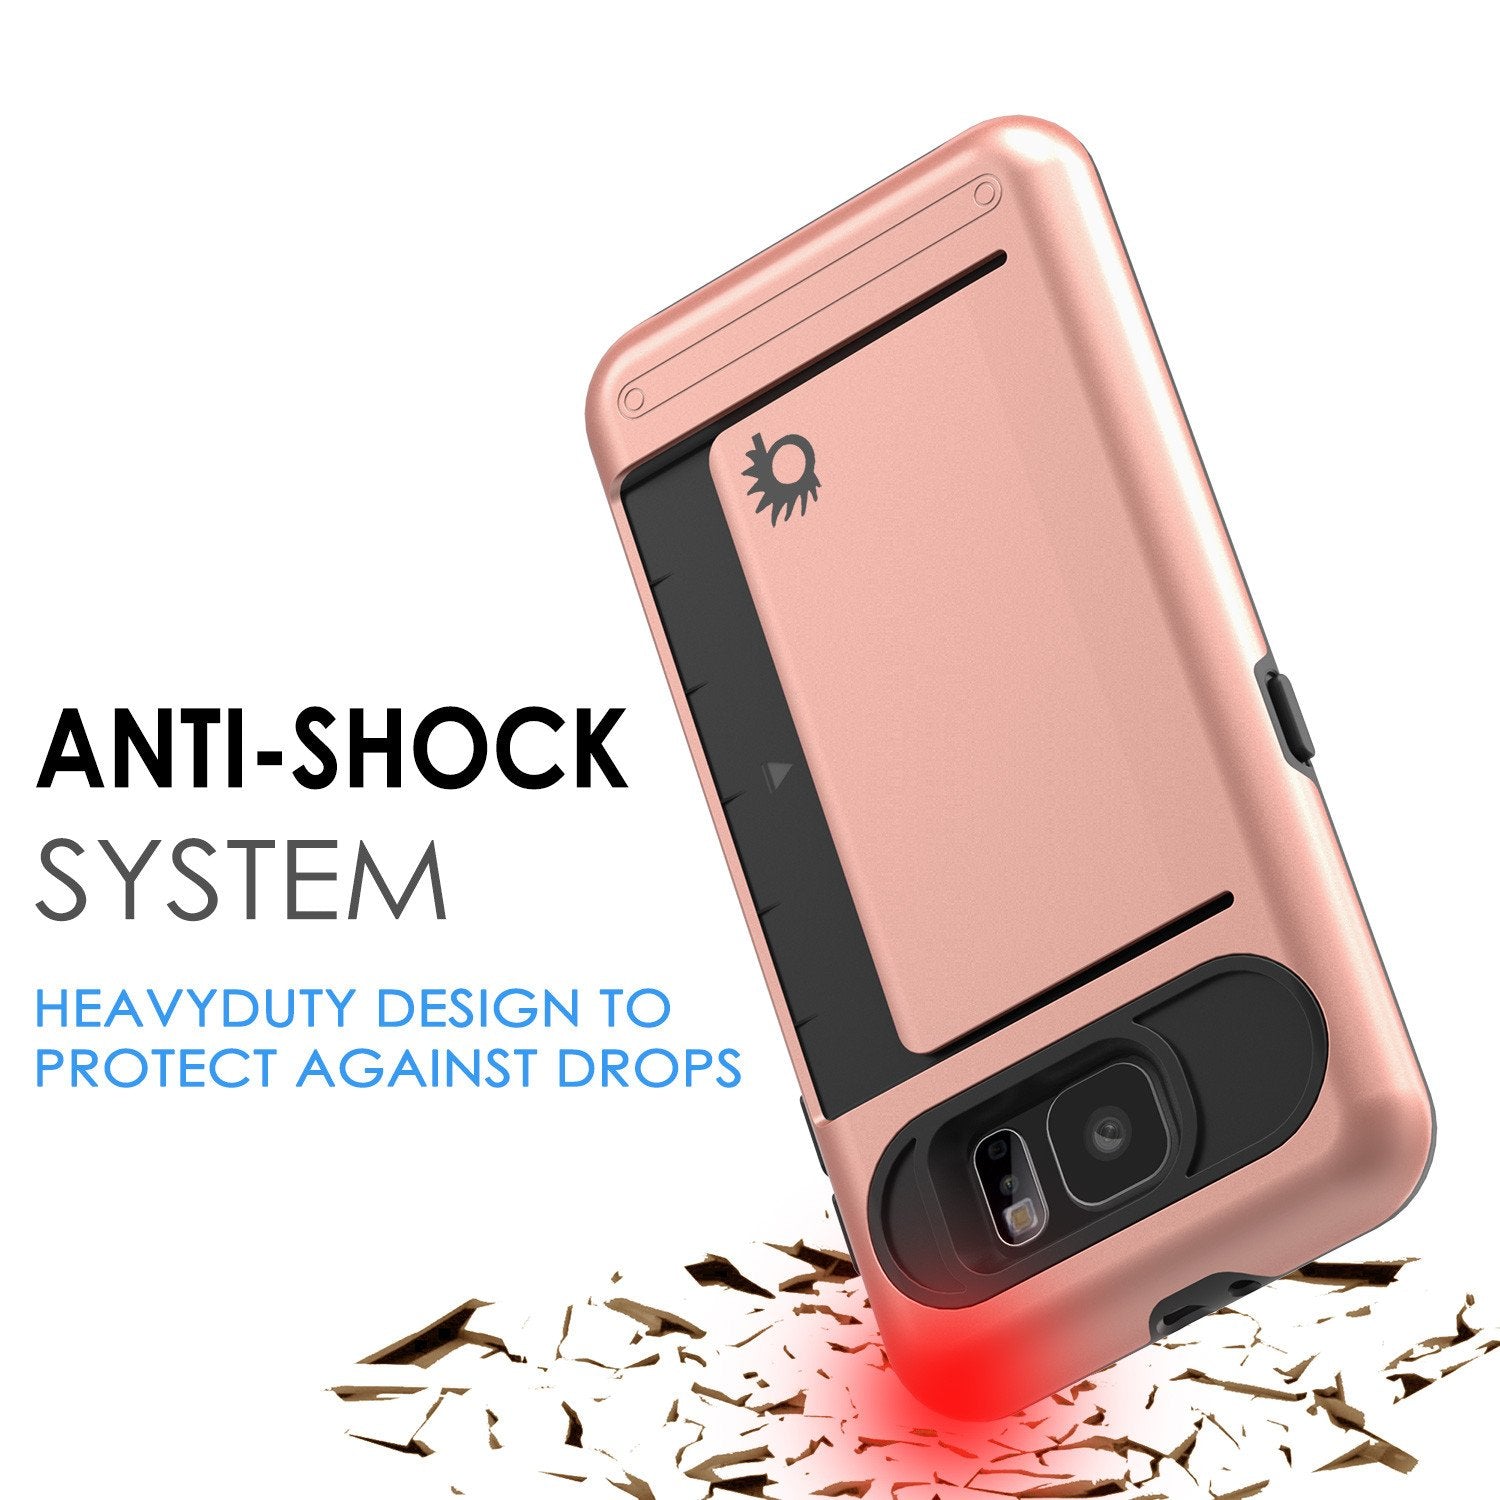 Galaxy s6 Case PunkCase CLUTCH Rose Gold Series Slim Armor Soft Cover Case w/ Tempered Glass - PunkCase NZ